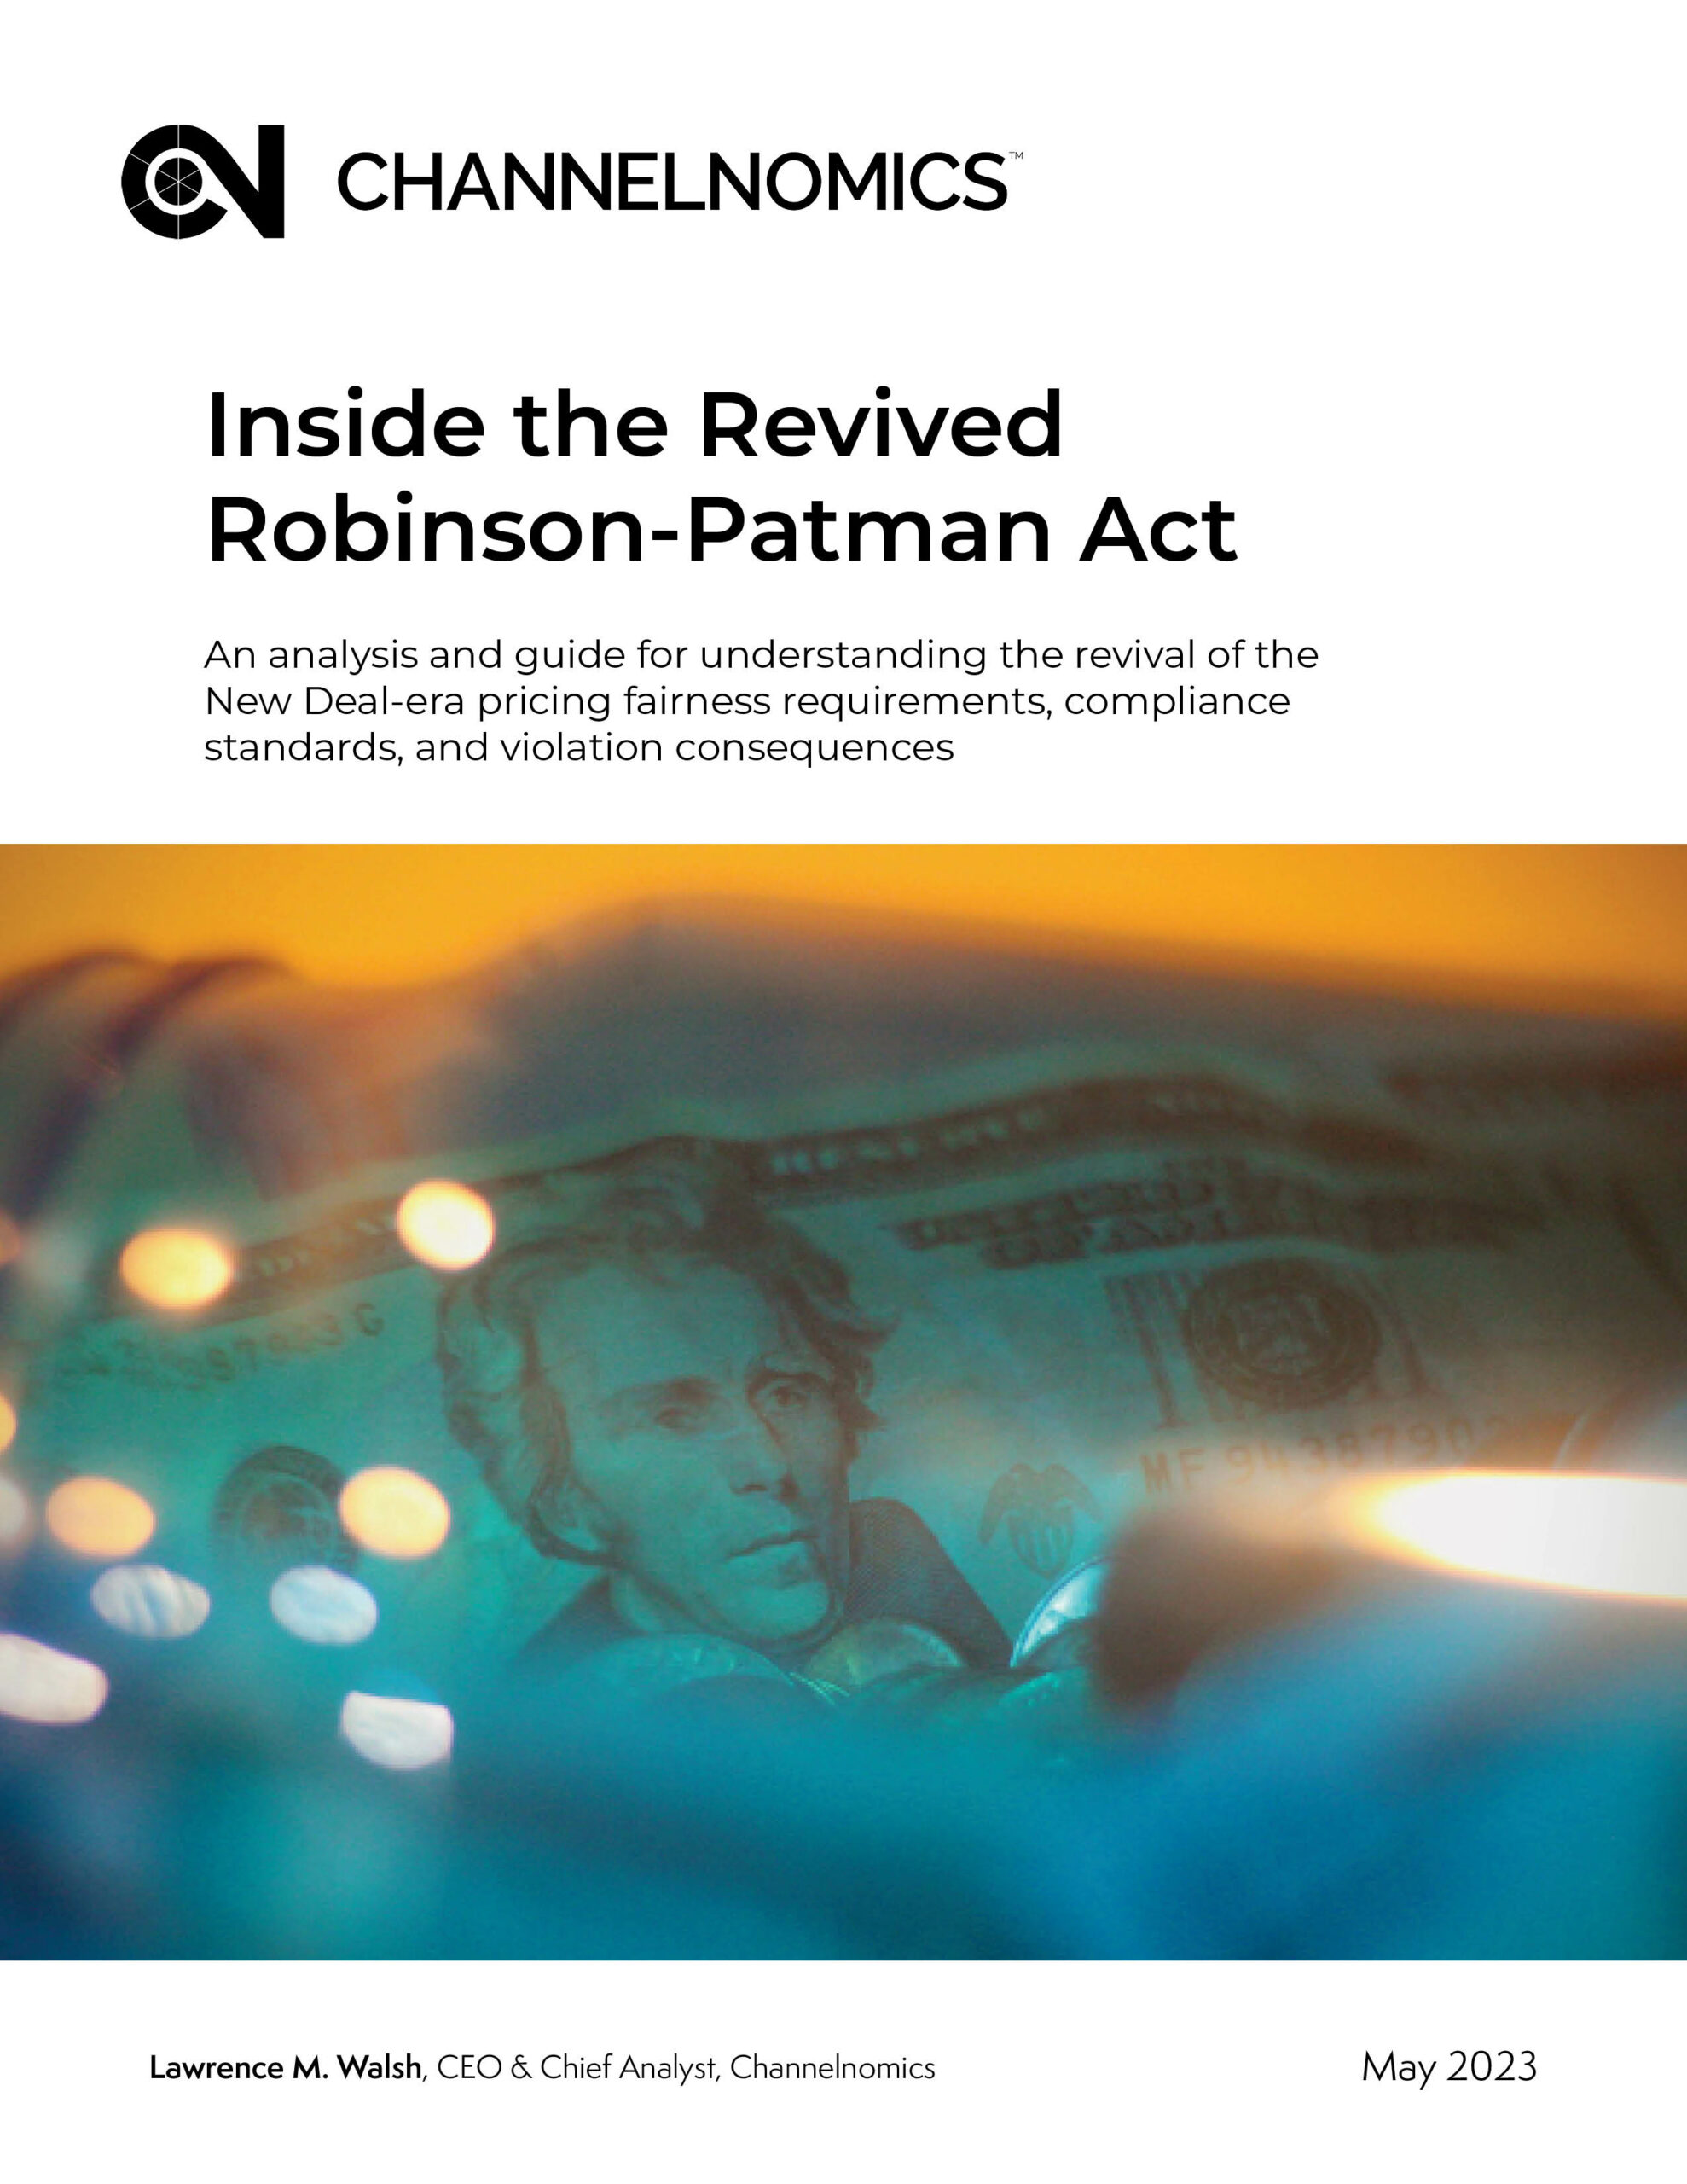 Inside the Revived Robinson-Patman Act